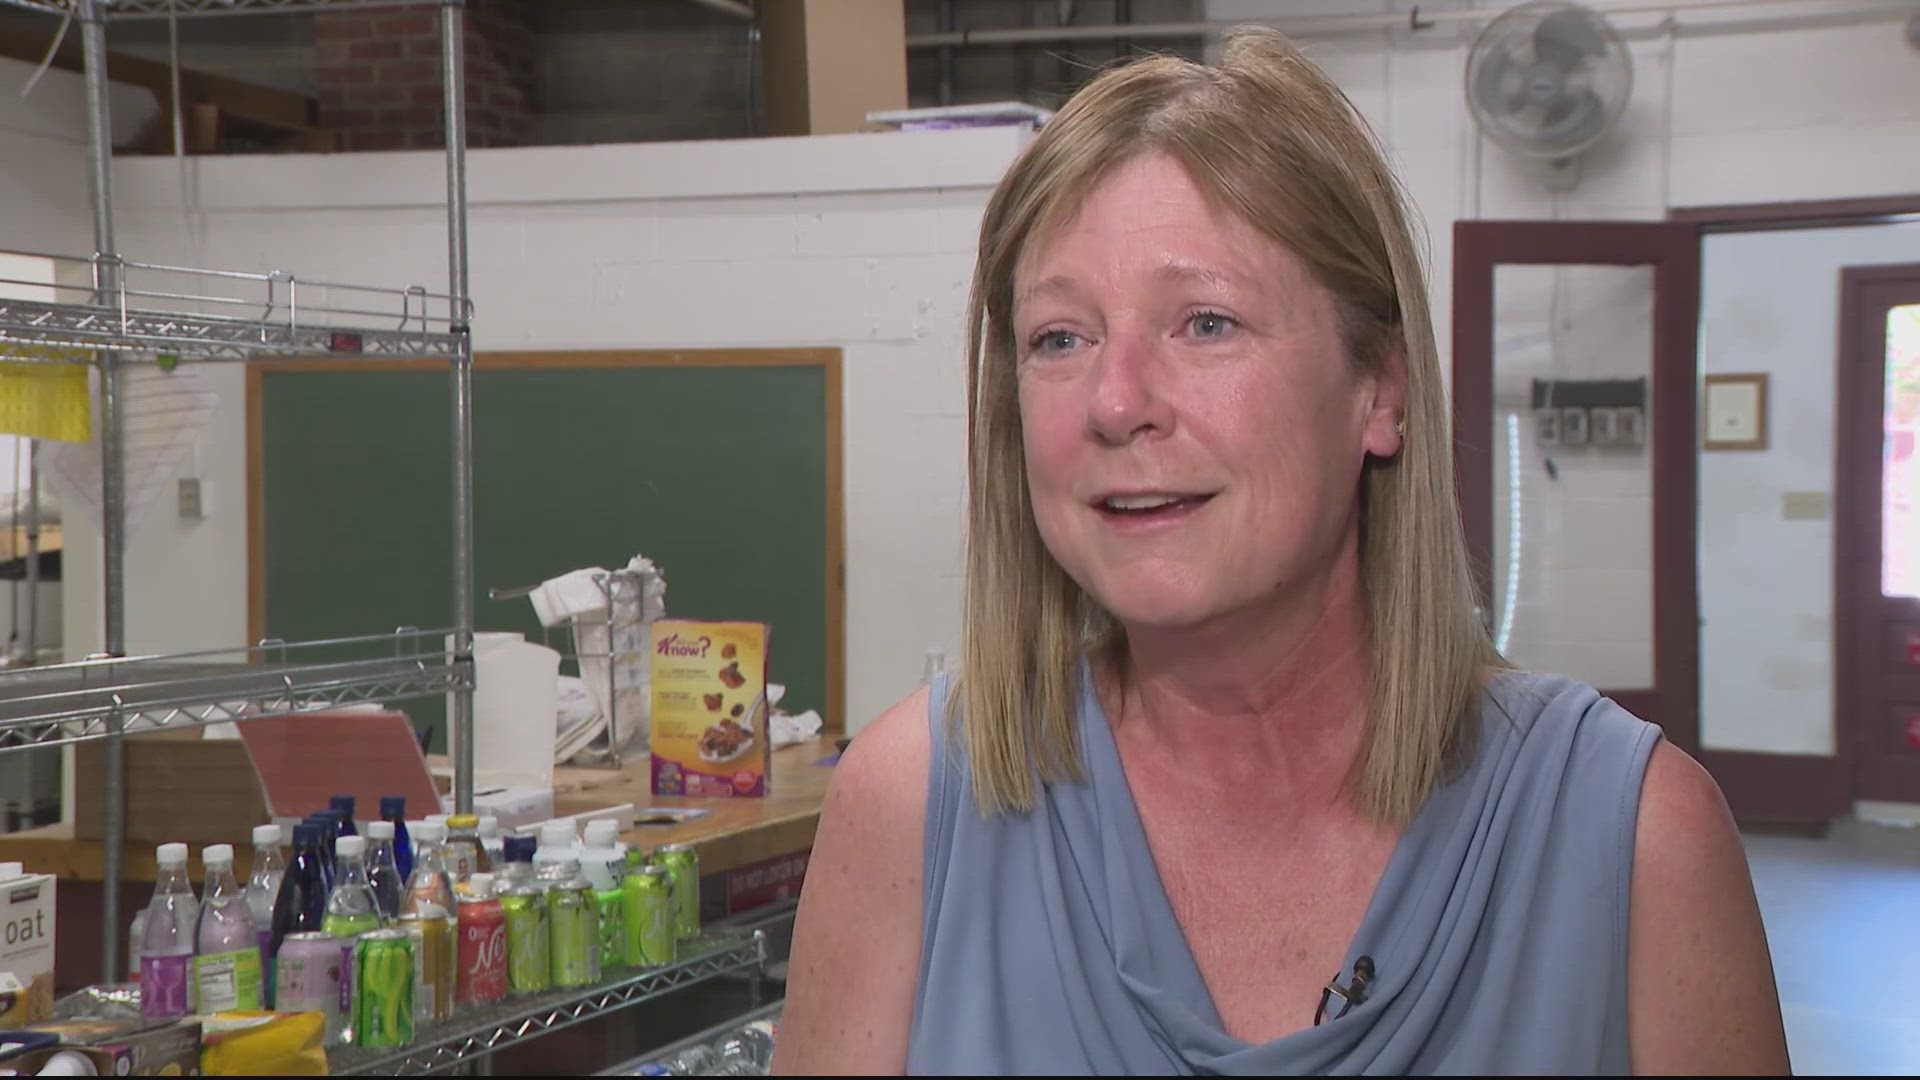 Michele Ott works with Fredrick City residents and their families to help ease the burden of food insecurity.